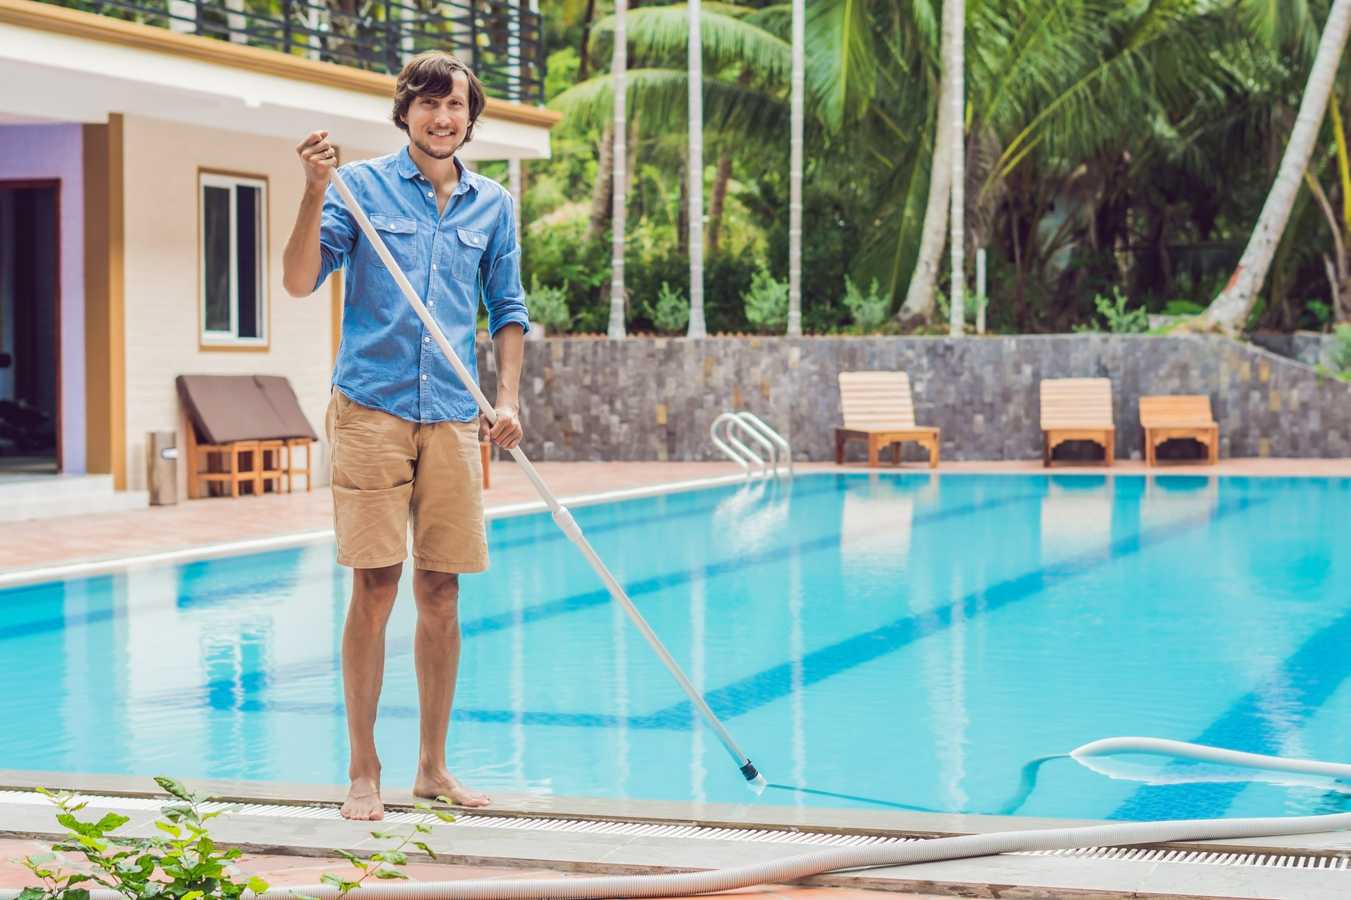 Pool Maintenance Cost. How much is a pool service?